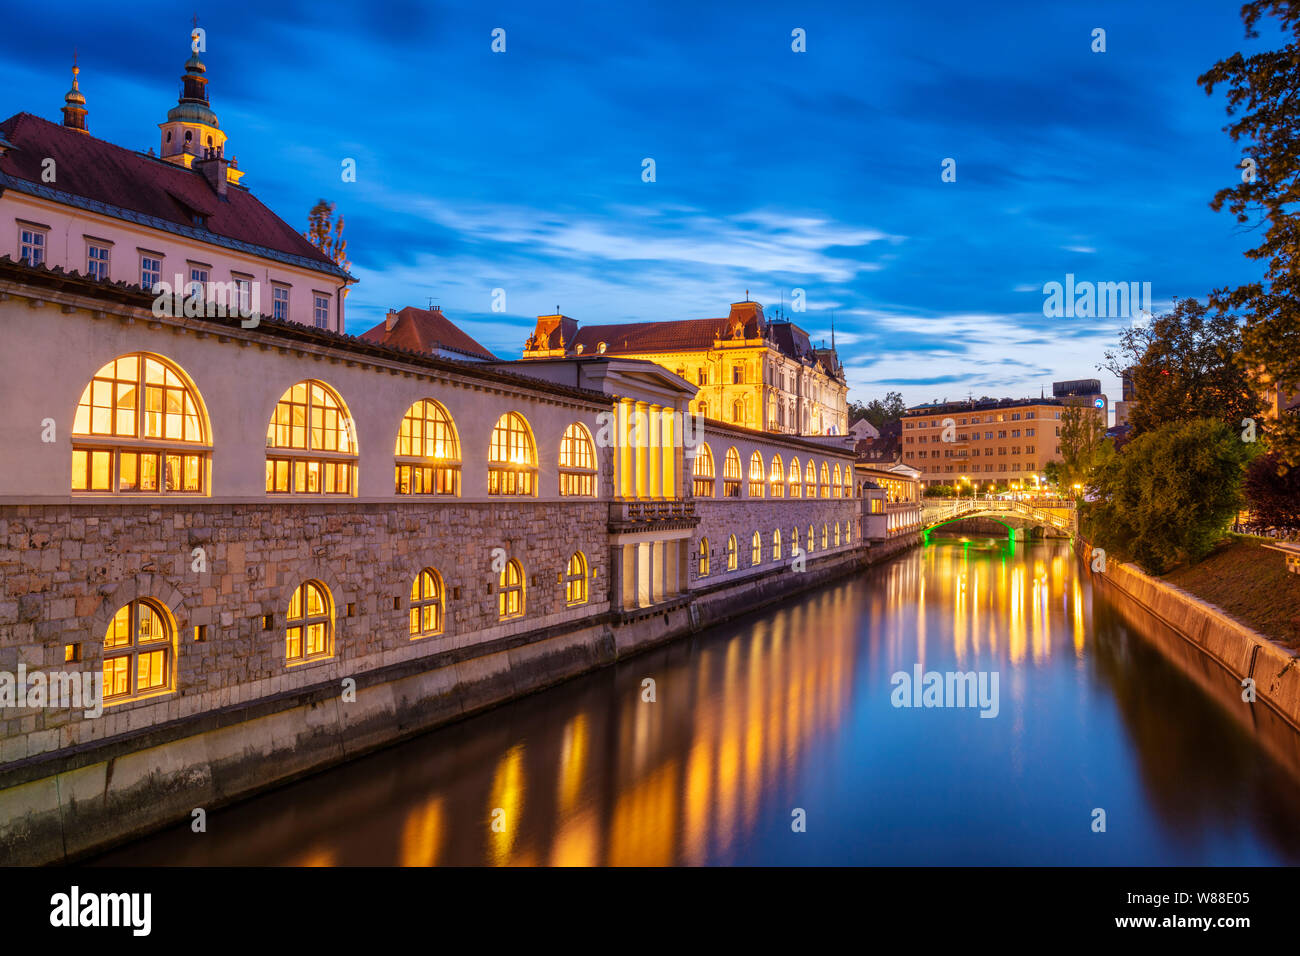 Reflections of the arches of the central covered Market place columns Plečnik's Arcades in the Ljubljanica river at night Ljubljana Slovenia EU Europe Stock Photo